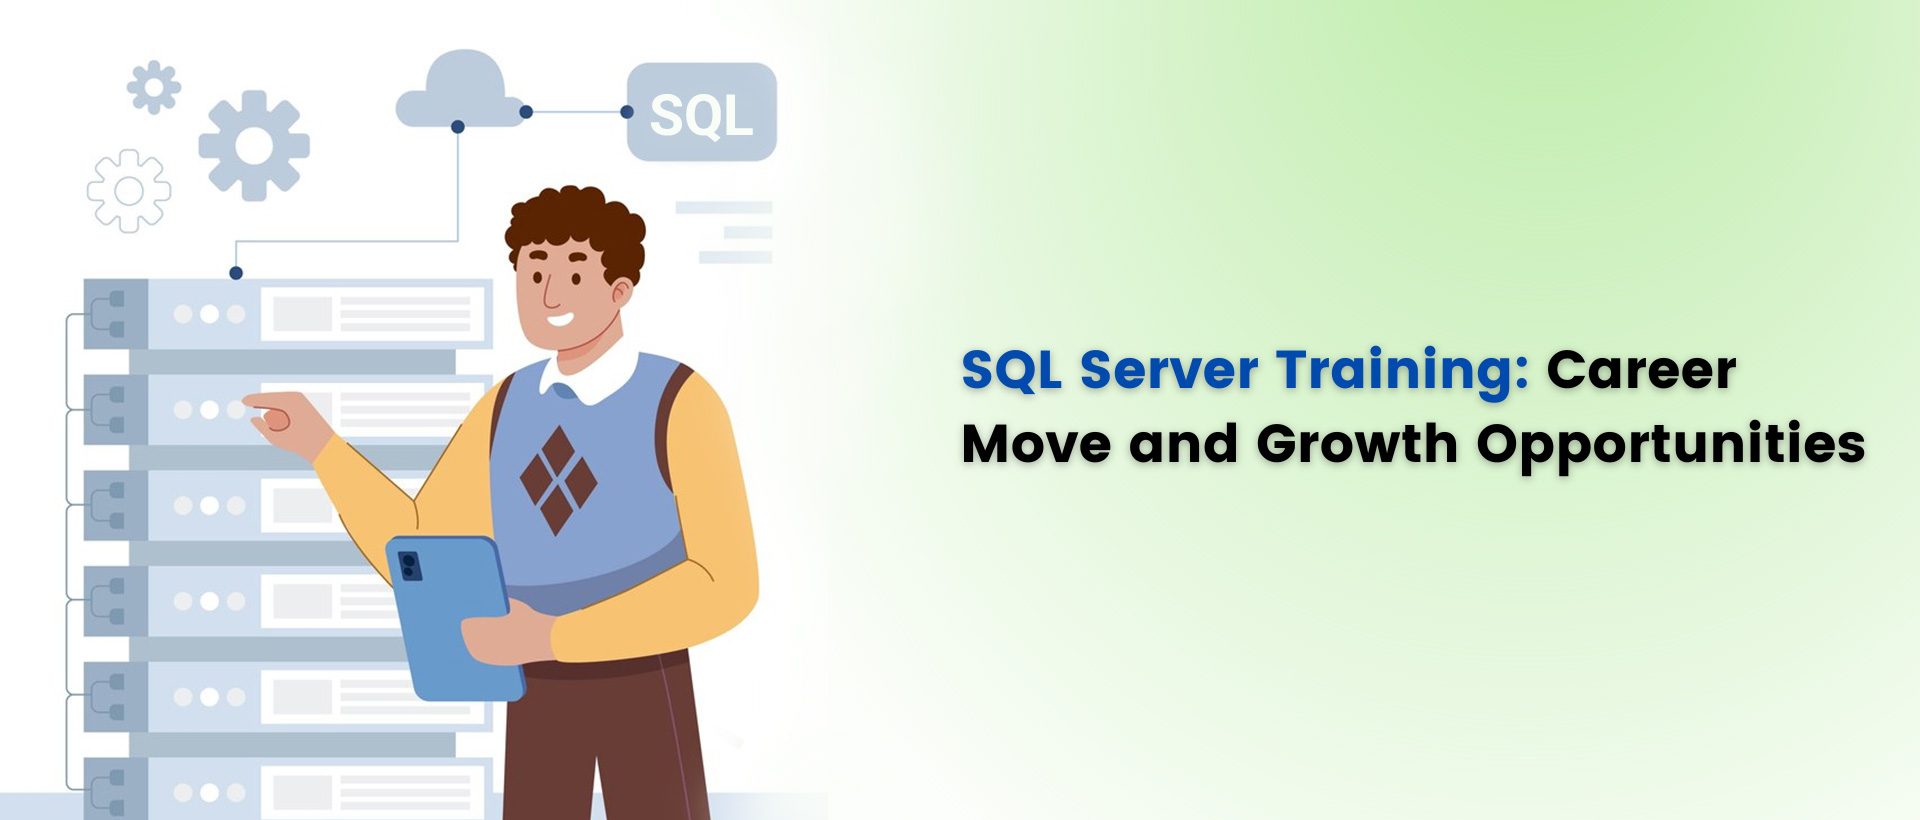 SQL Server Training: Career Move and Growth Opportunities